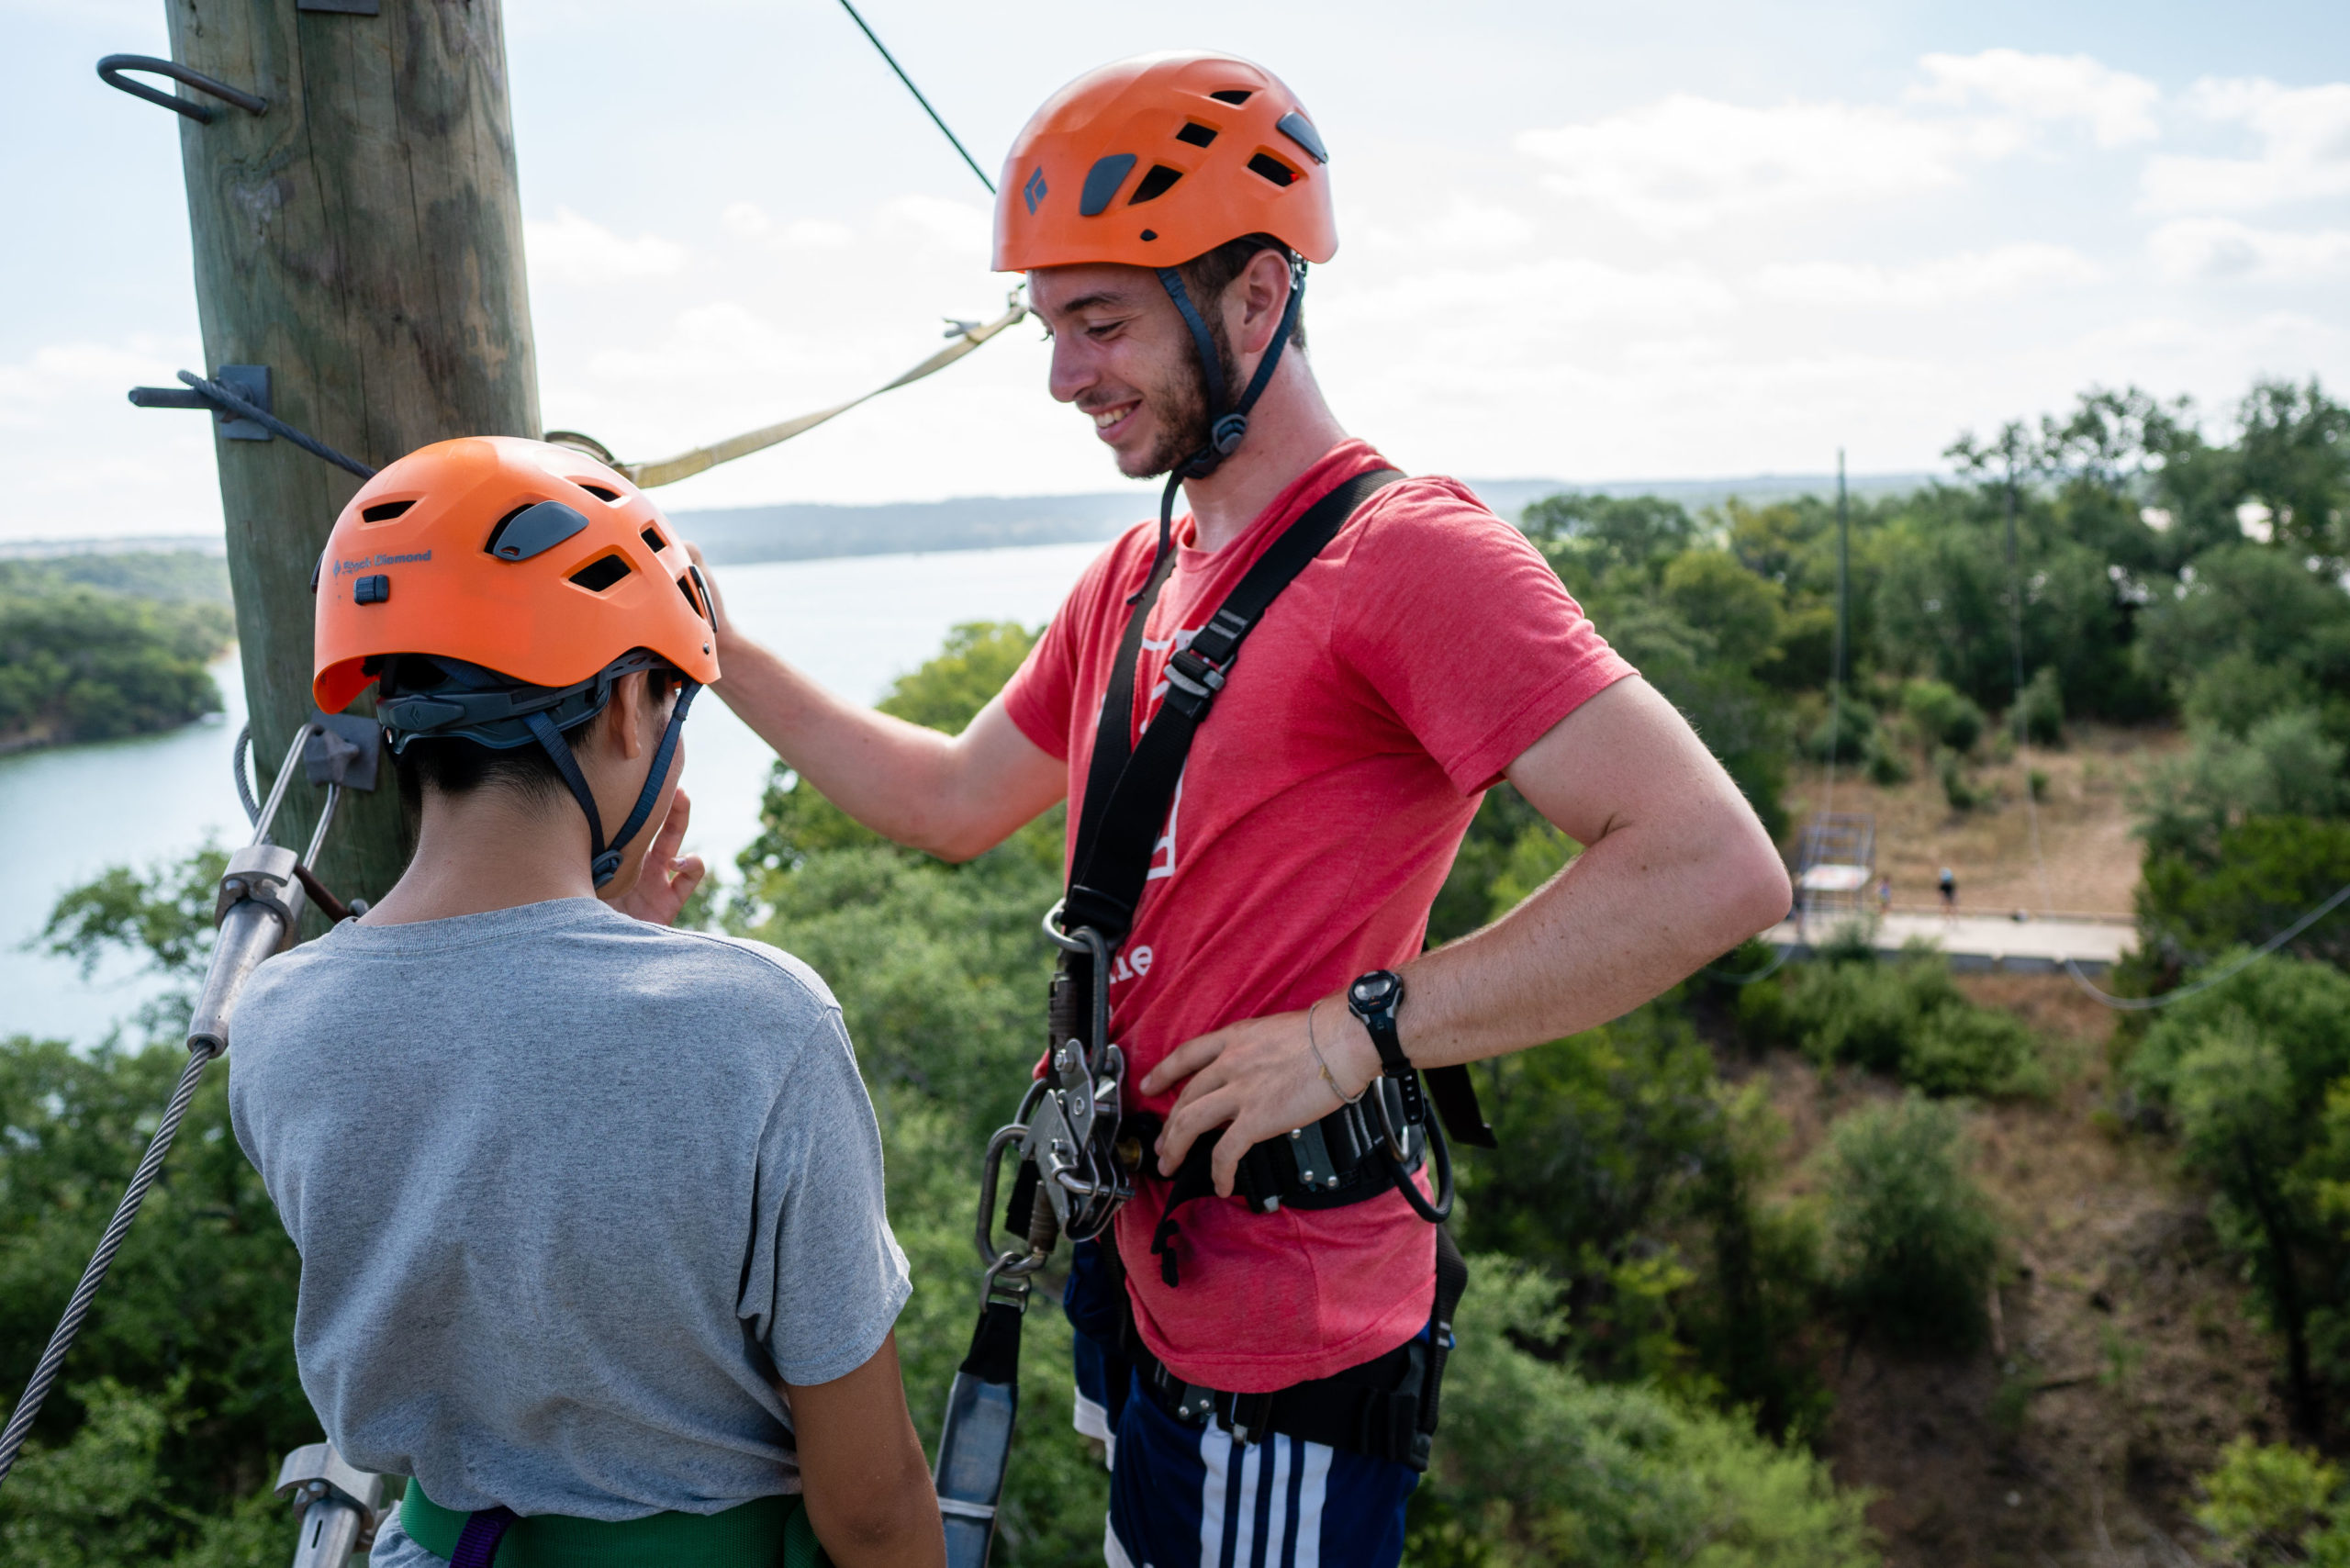 Austin sunshine camps counselor talking with a camper near the zip line